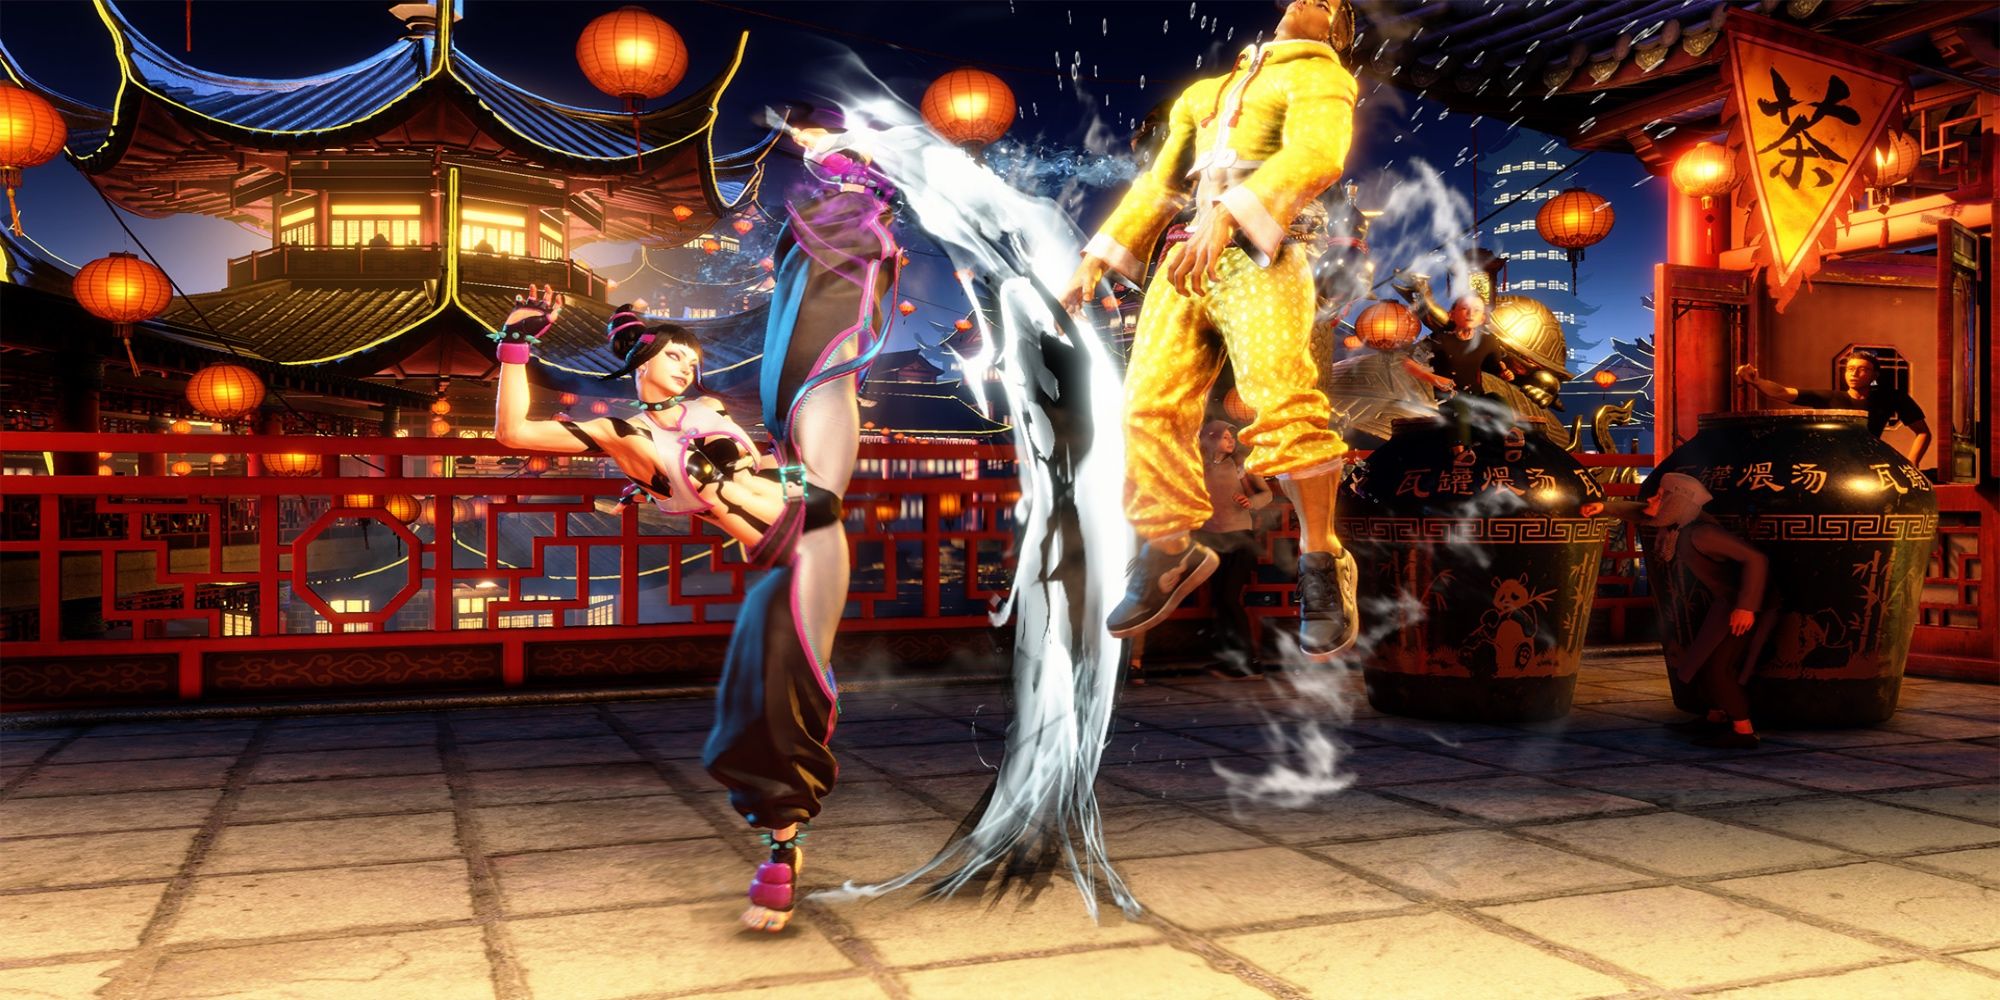 Juri lifts her opponent into the air with her kicks